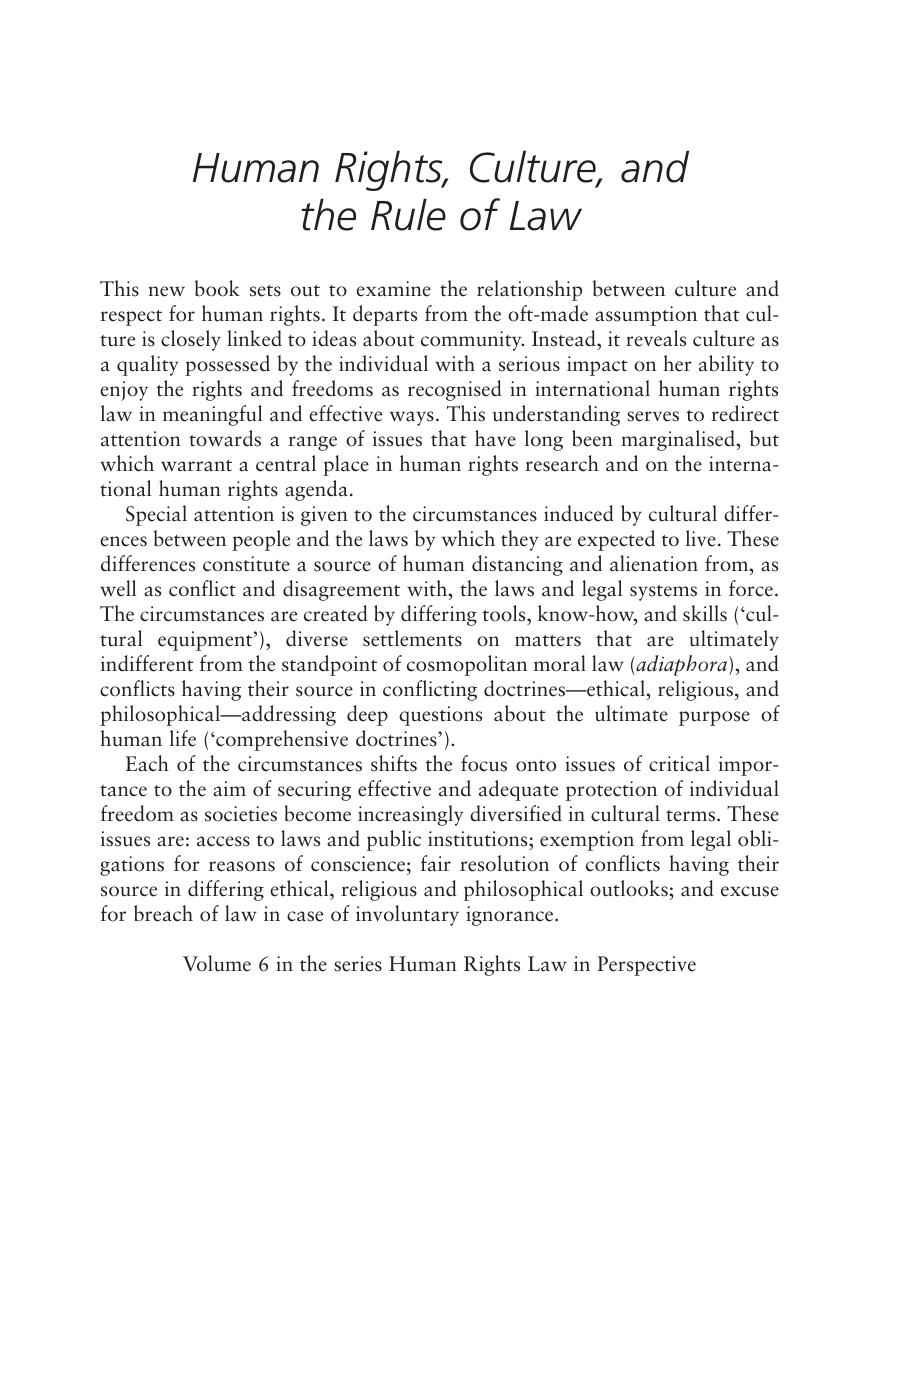 Human Rights, Culture, and the Rule of Law (Human Rights Law in Perspective) 2005